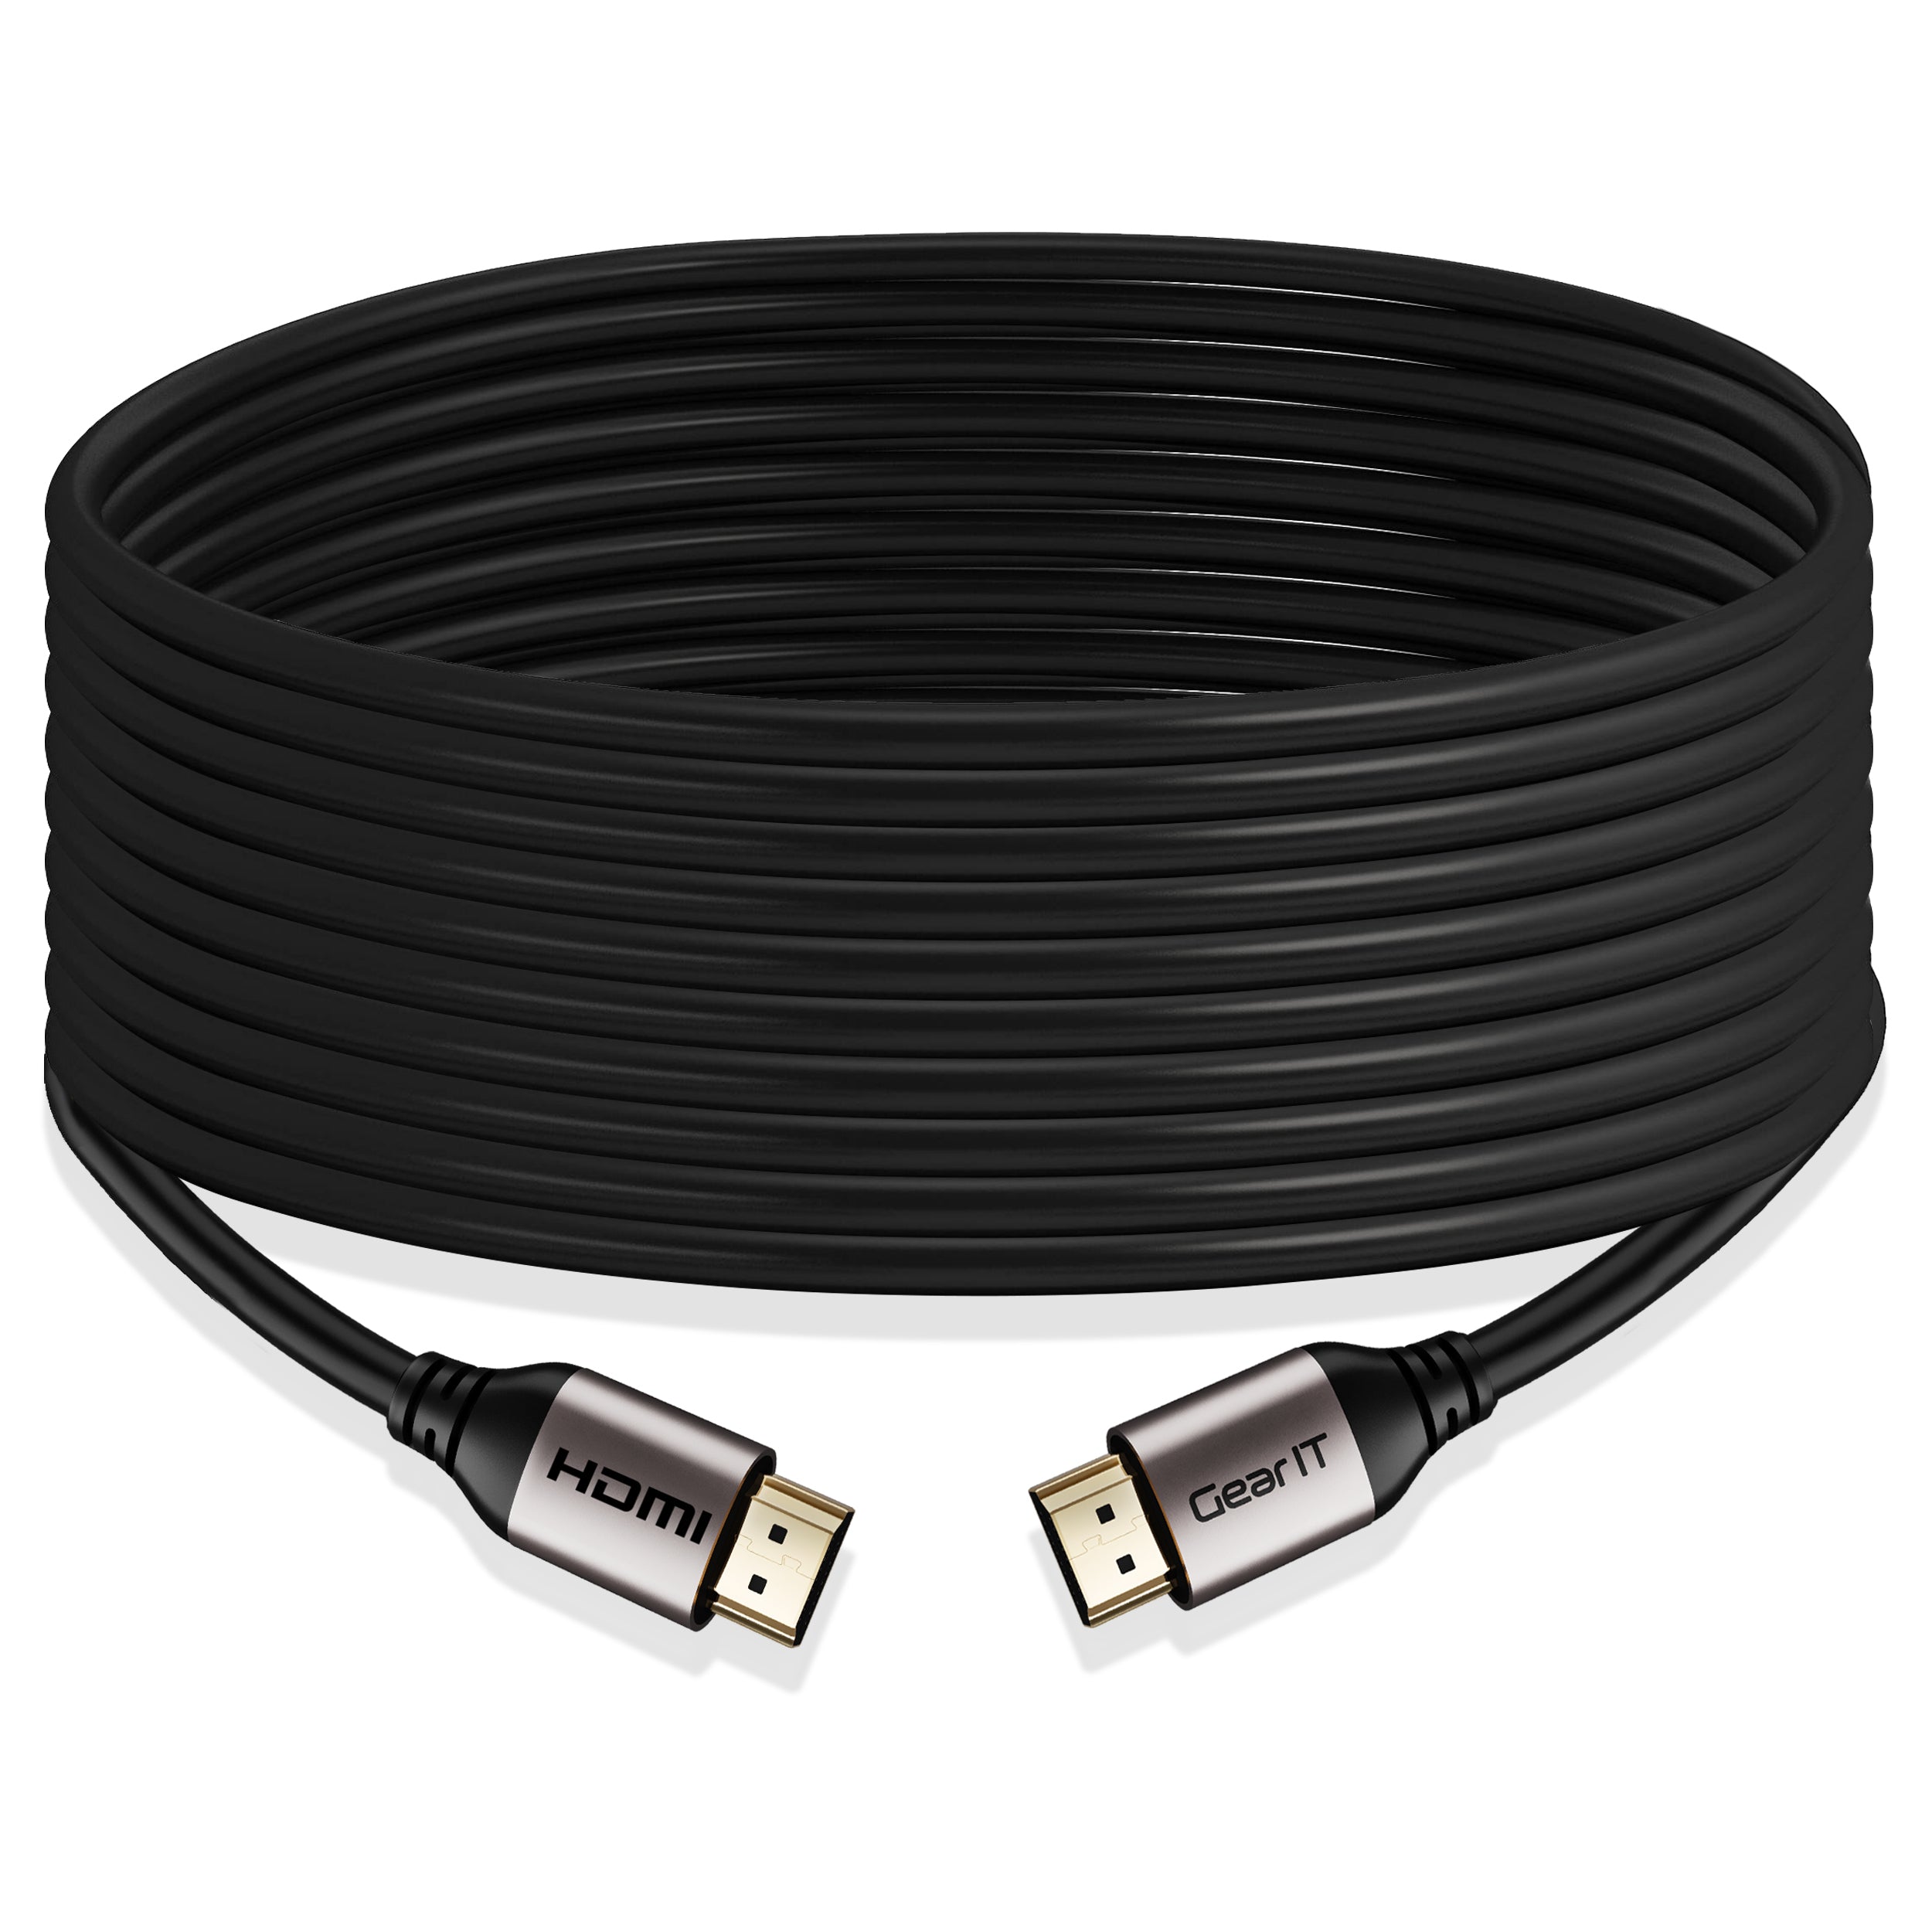 GearIT HDMI Cable CL3 In-Wall Rated (50ft / 15.2m) High-Speed HDMI 2.0b, 4K 60HZ, 3D, Arc, HDCP 2.2, HDR, 18Gbps, Other